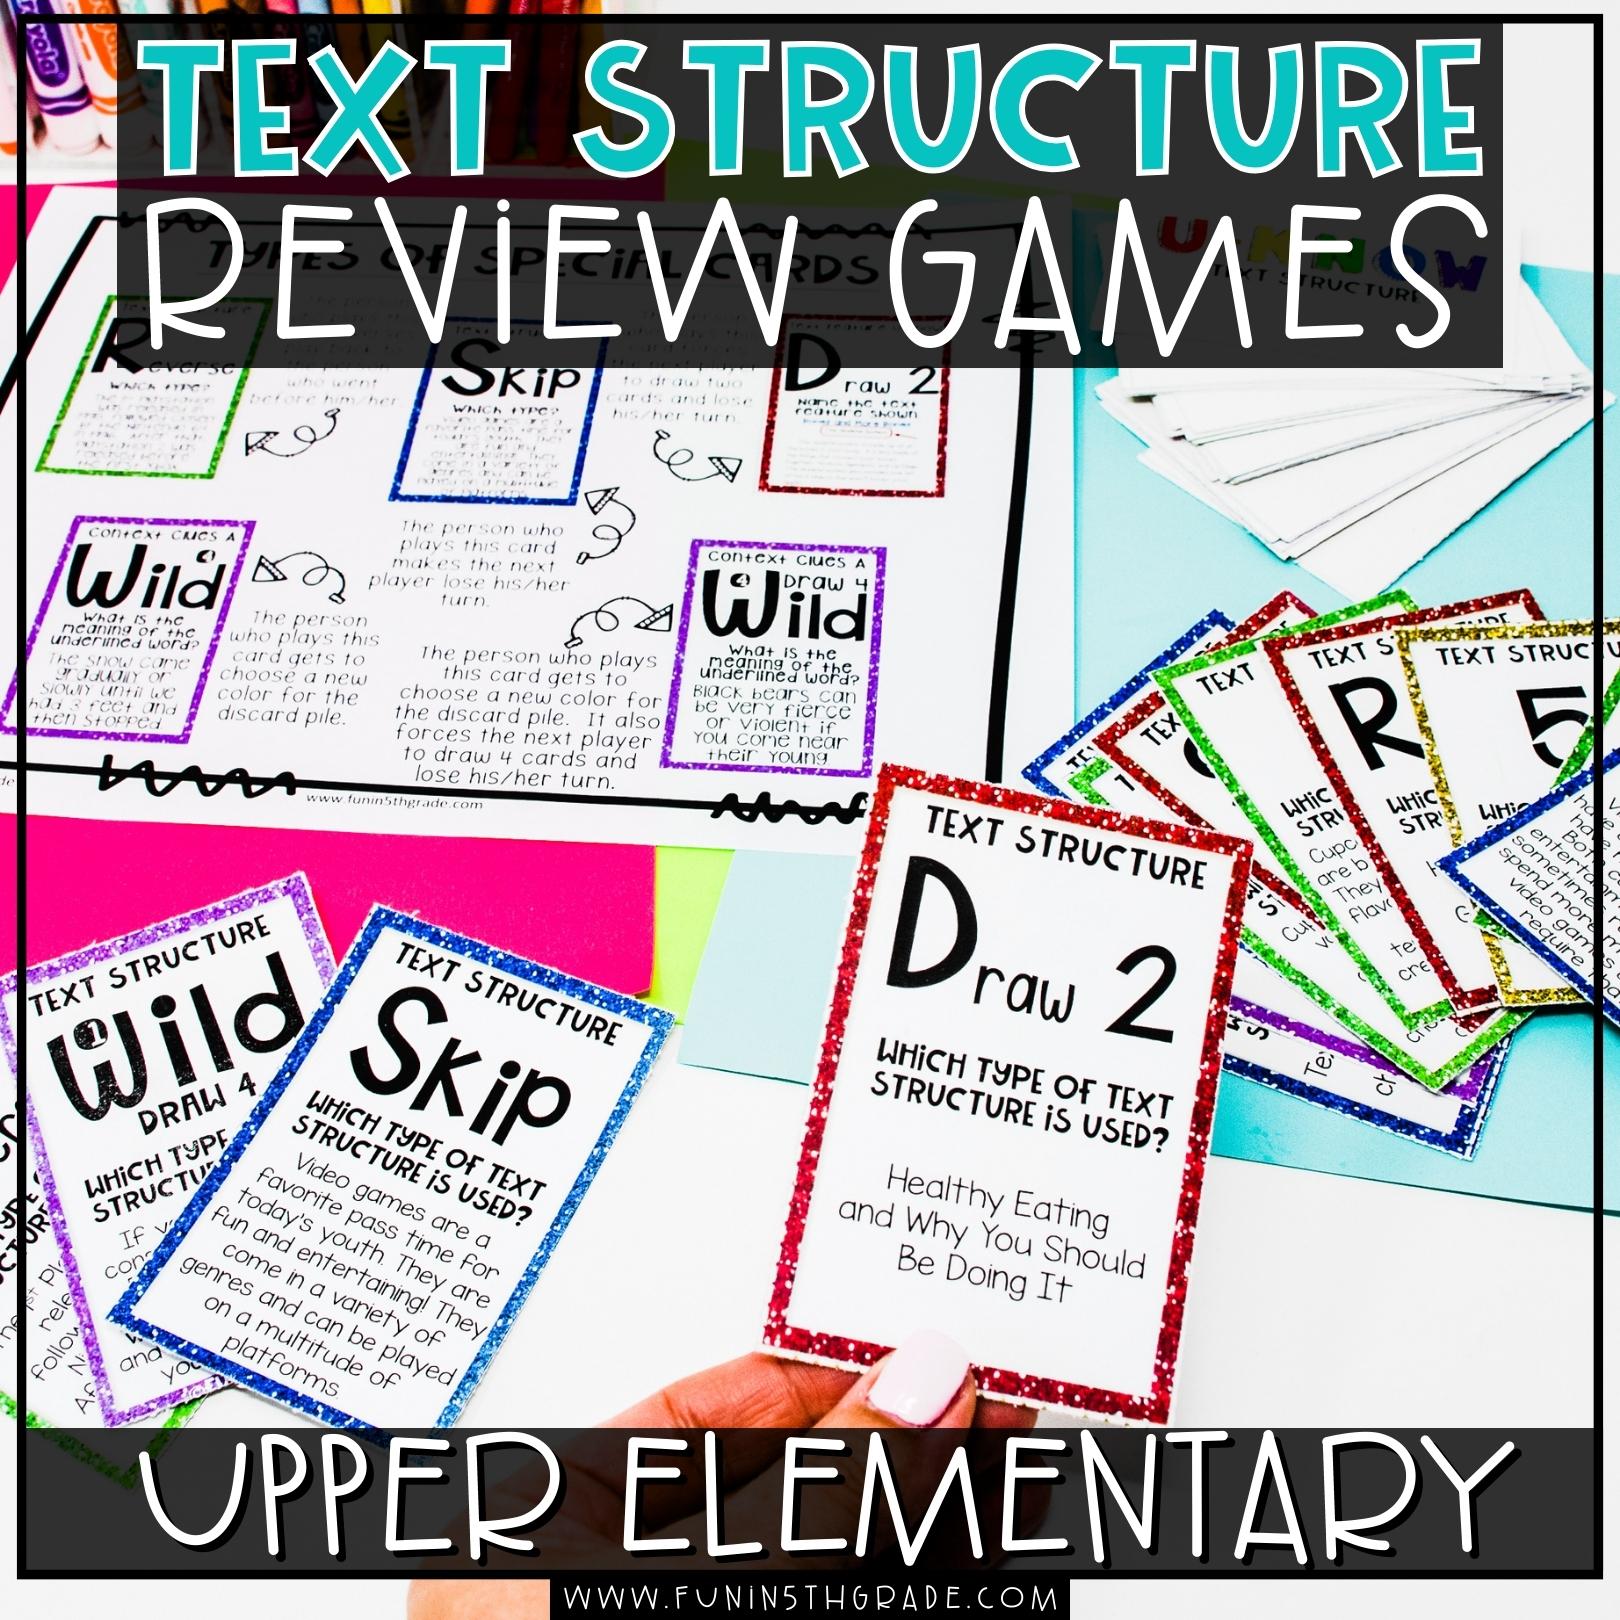 Fun Text Structure Review Games blog image with image of Sticker Style resource